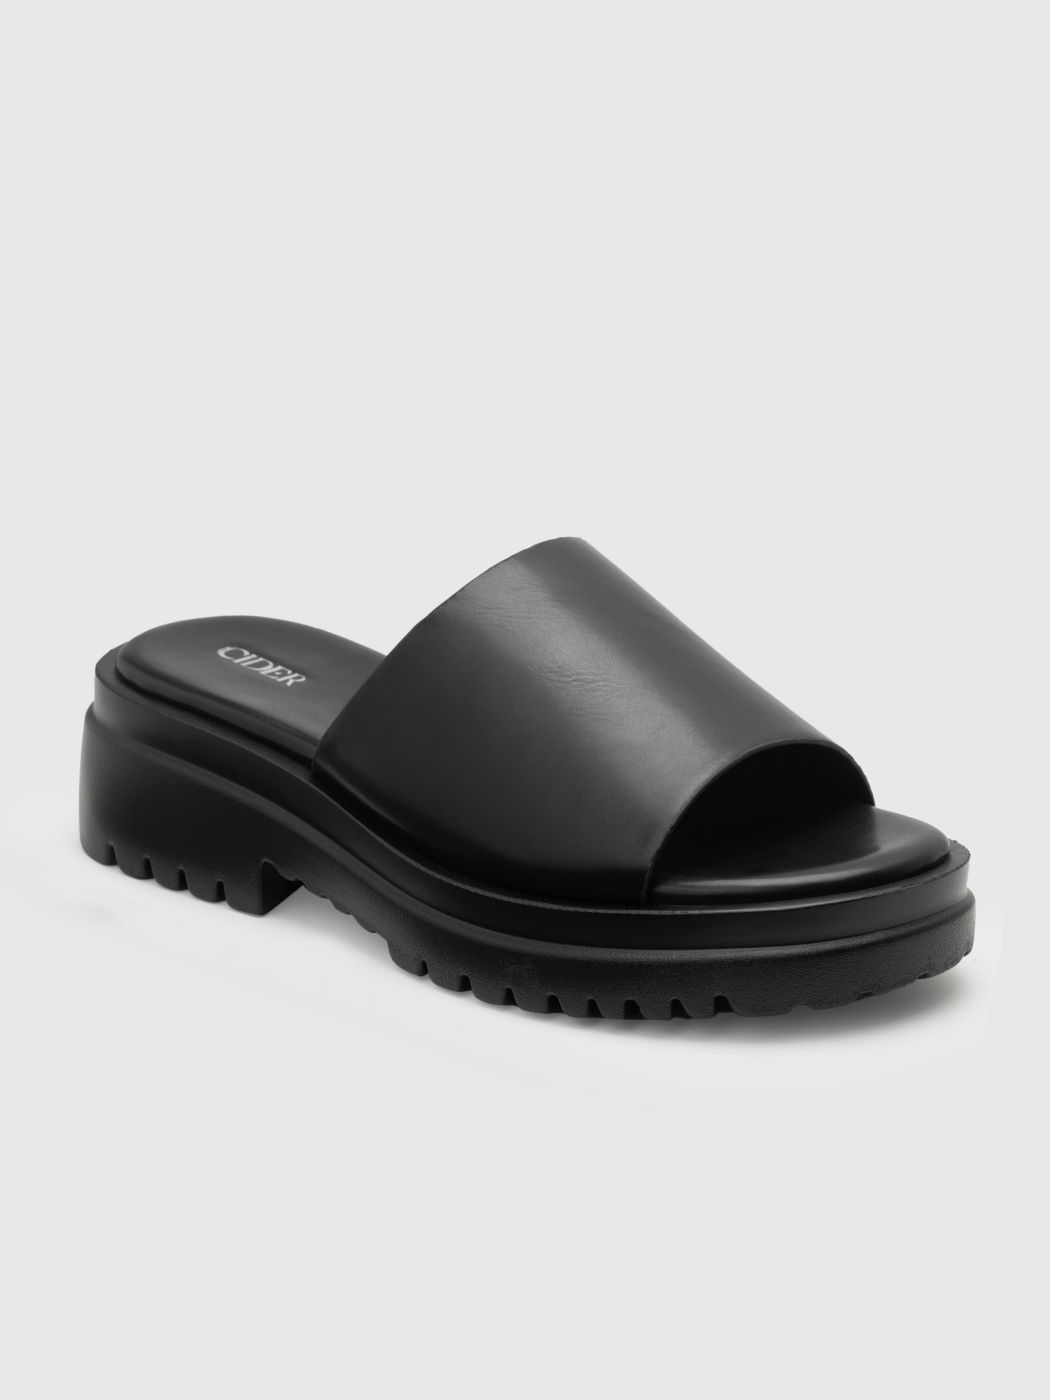 Classic Single Band Slippers For Daily Casual Vacation